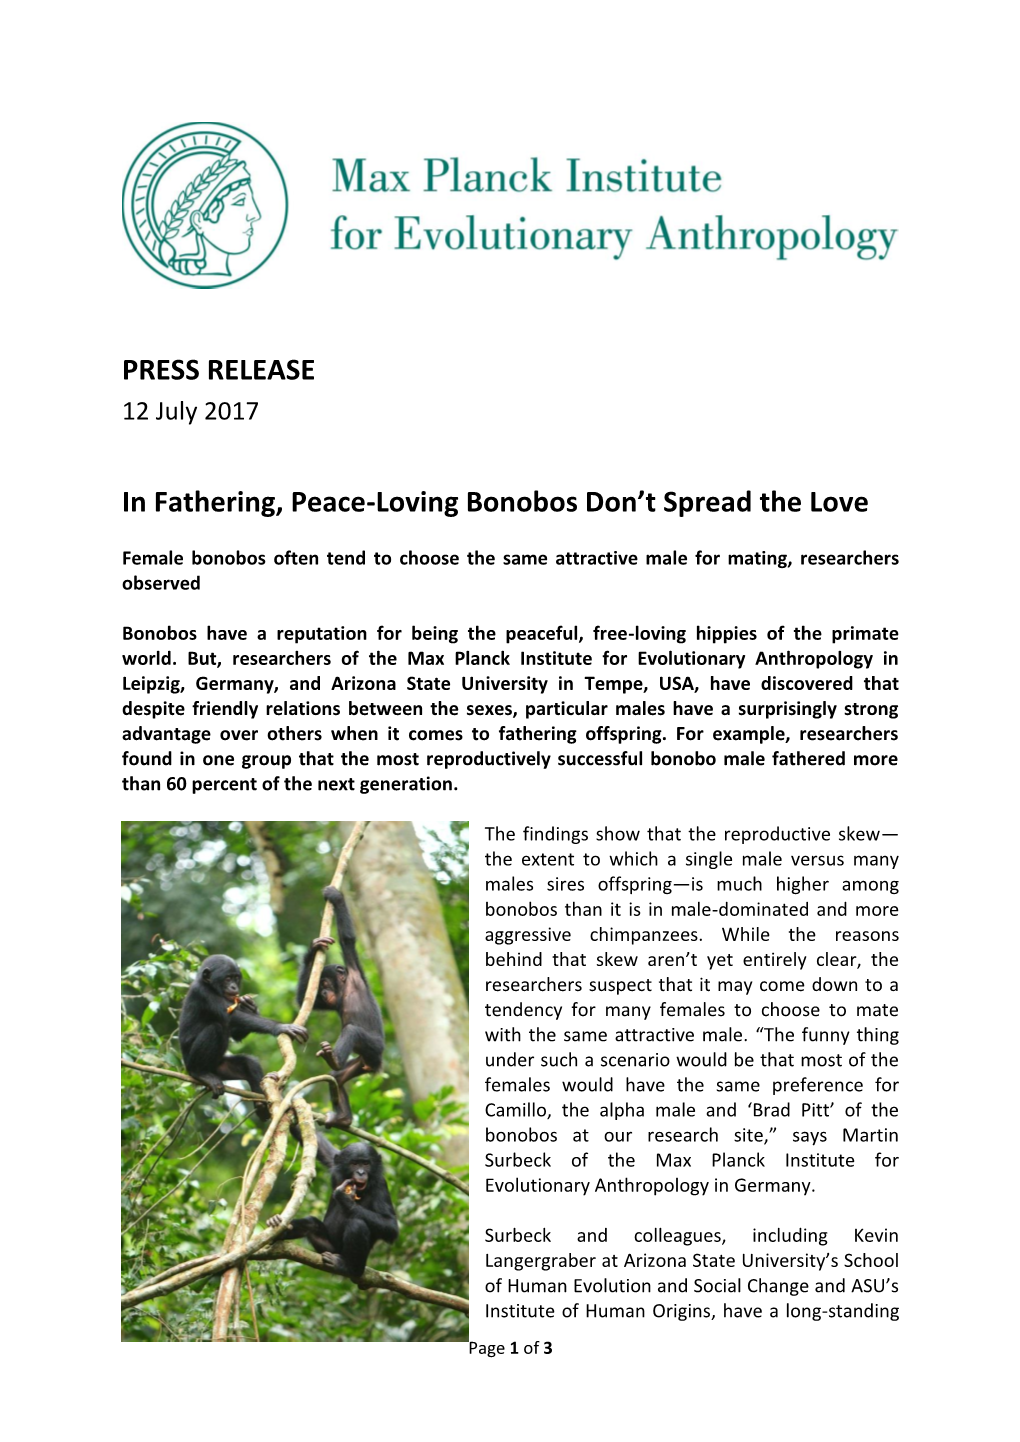 PRESS RELEASE in Fathering, Peace-Loving Bonobos Don't Spread The